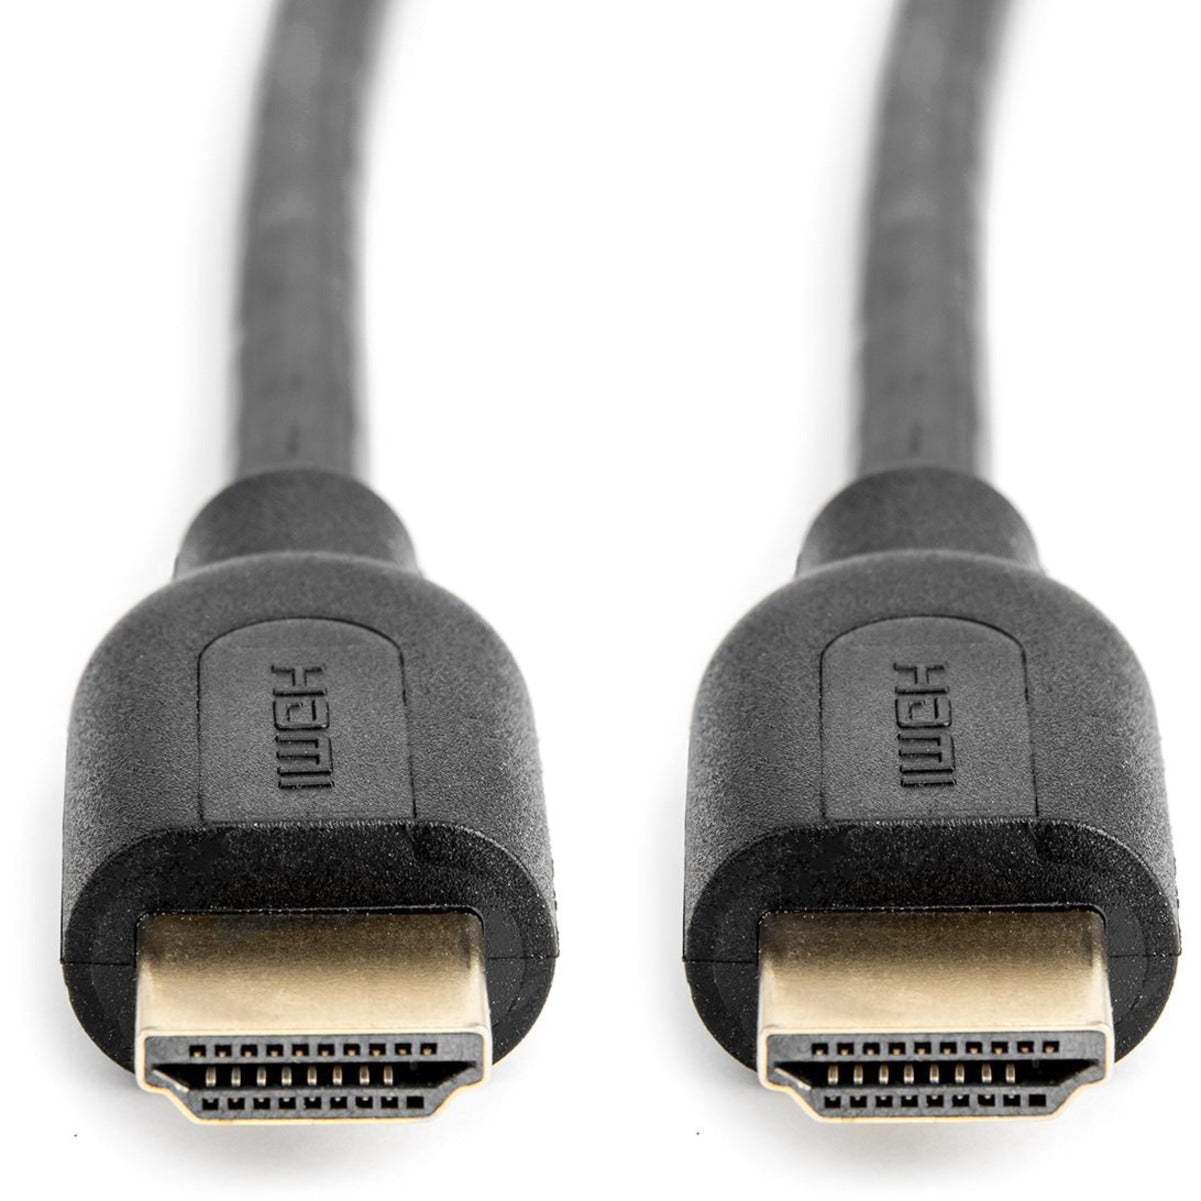 Rocstor Y10C106-B1 Premium High Speed HDMI (M/M) Cable with Ethernet 3-ft, Lifetime Warranty, RoHS Certified